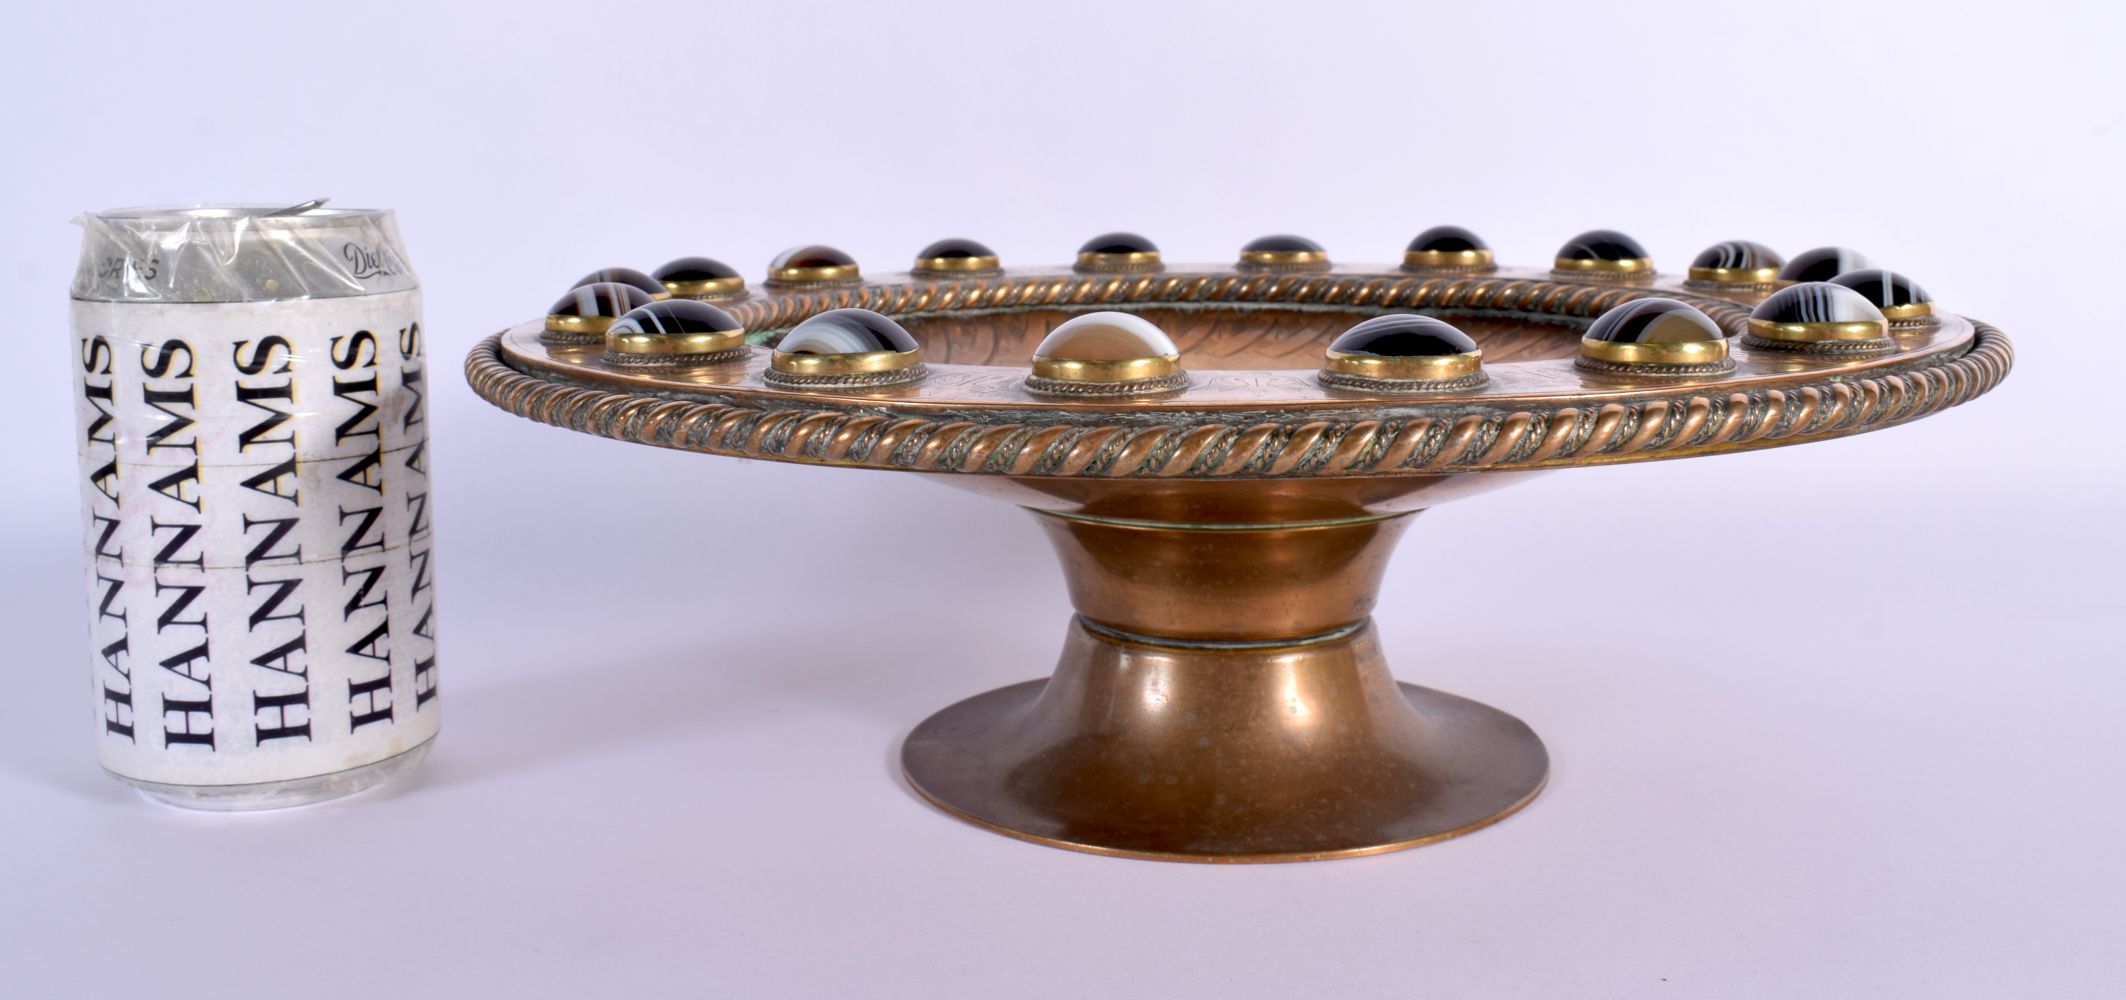 A LOVELY LARGE 19TH CENTURY EUROPEAN AGATE MOUNTED BRONZE TAZZA decorated with foliage. 28 cm x 10 c